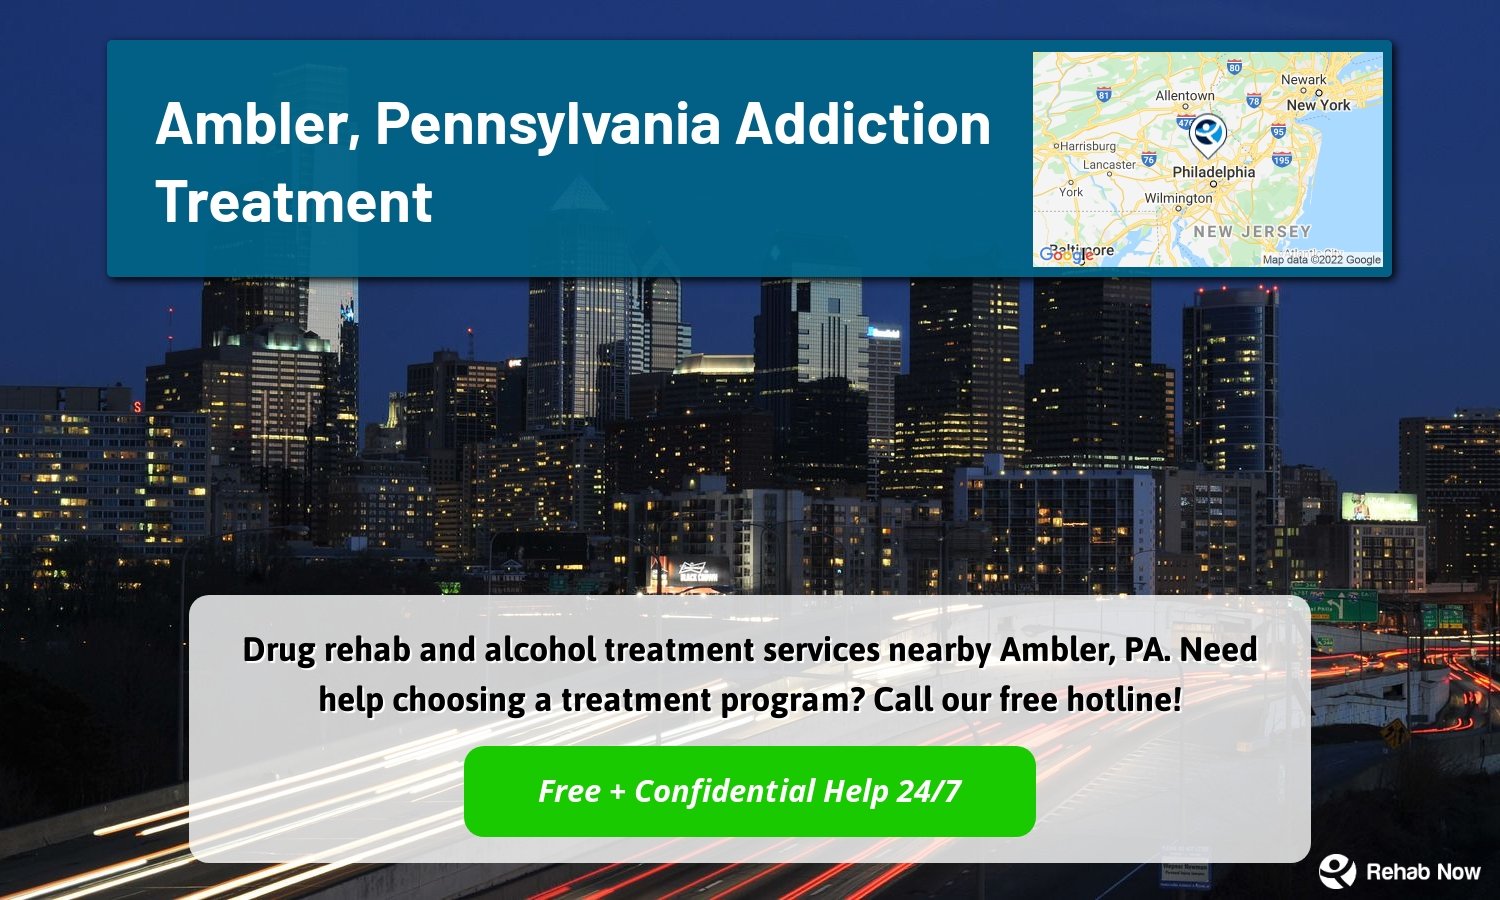 Drug rehab and alcohol treatment services nearby Ambler, PA. Need help choosing a treatment program? Call our free hotline!